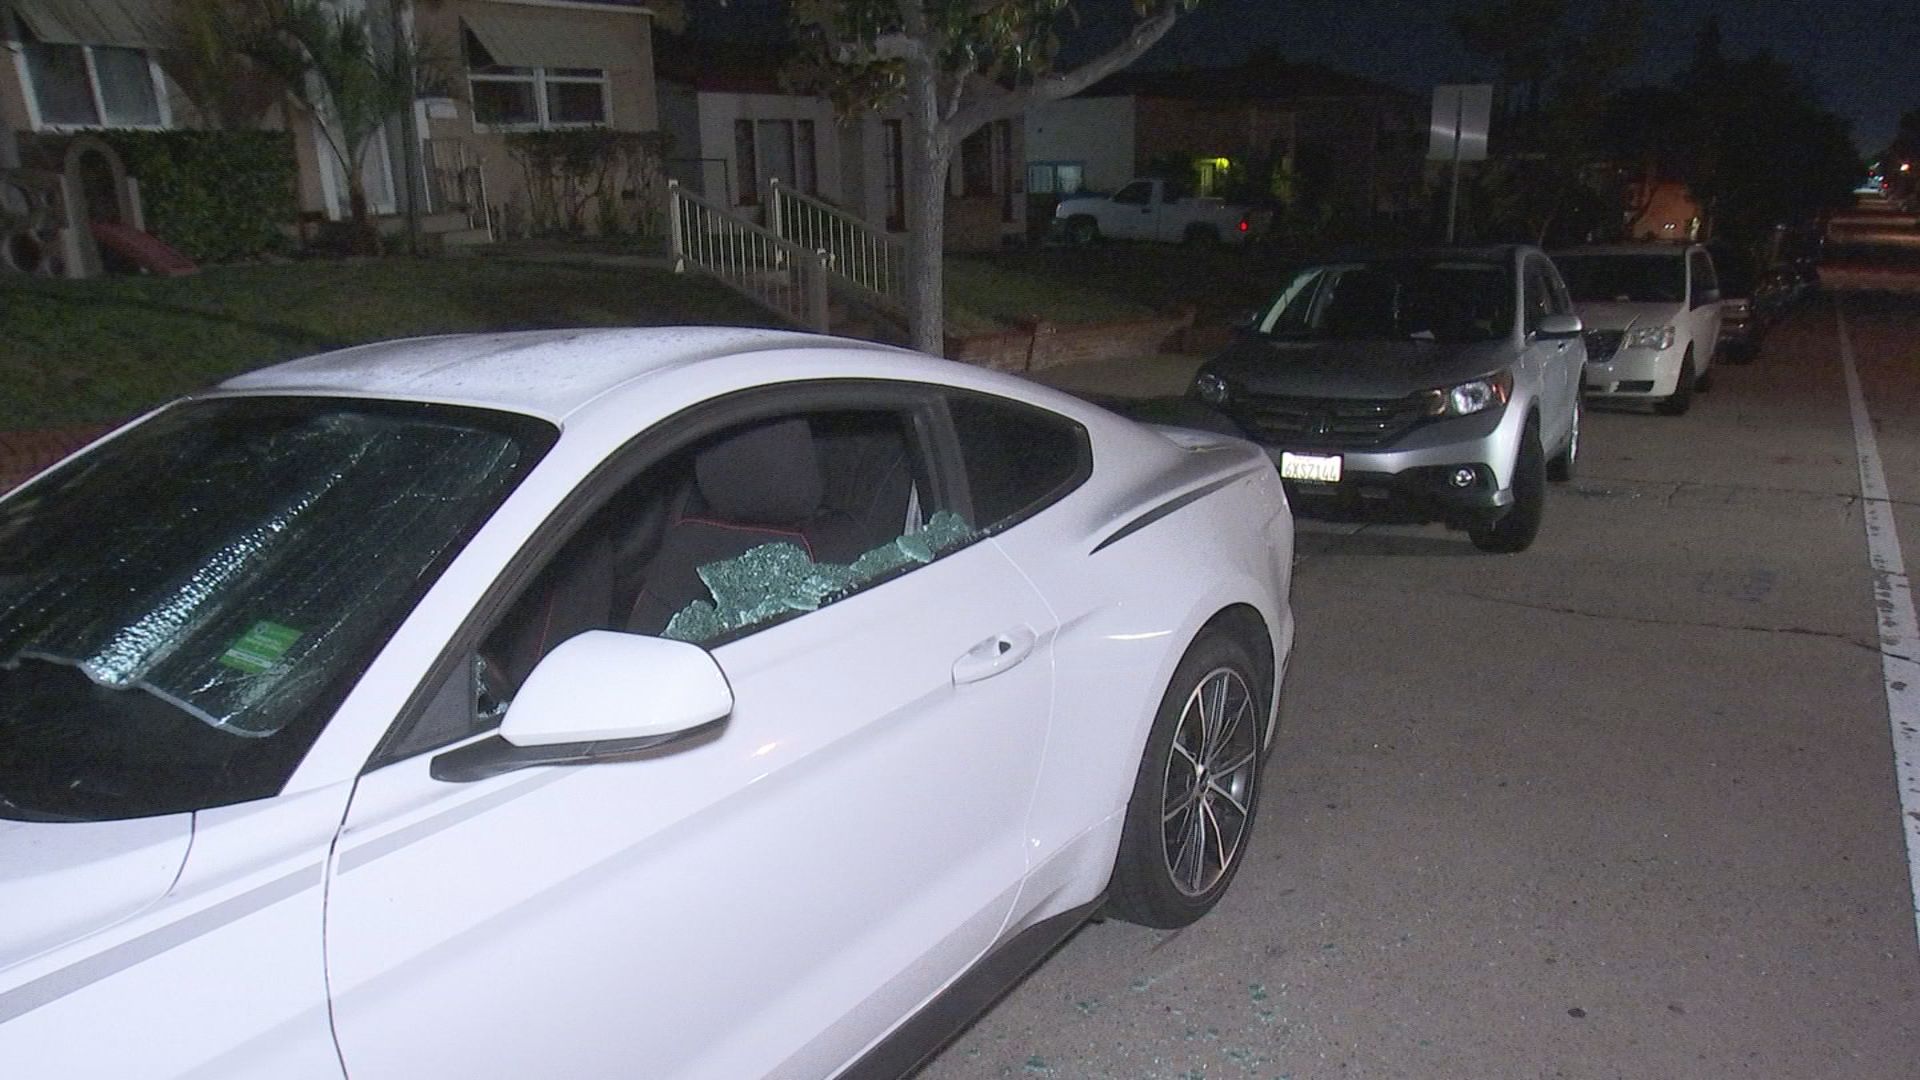 Suspect caught on camera apparently smashing car windows in Whittier  vandalism involving 50 vehicles - ABC7 Los Angeles